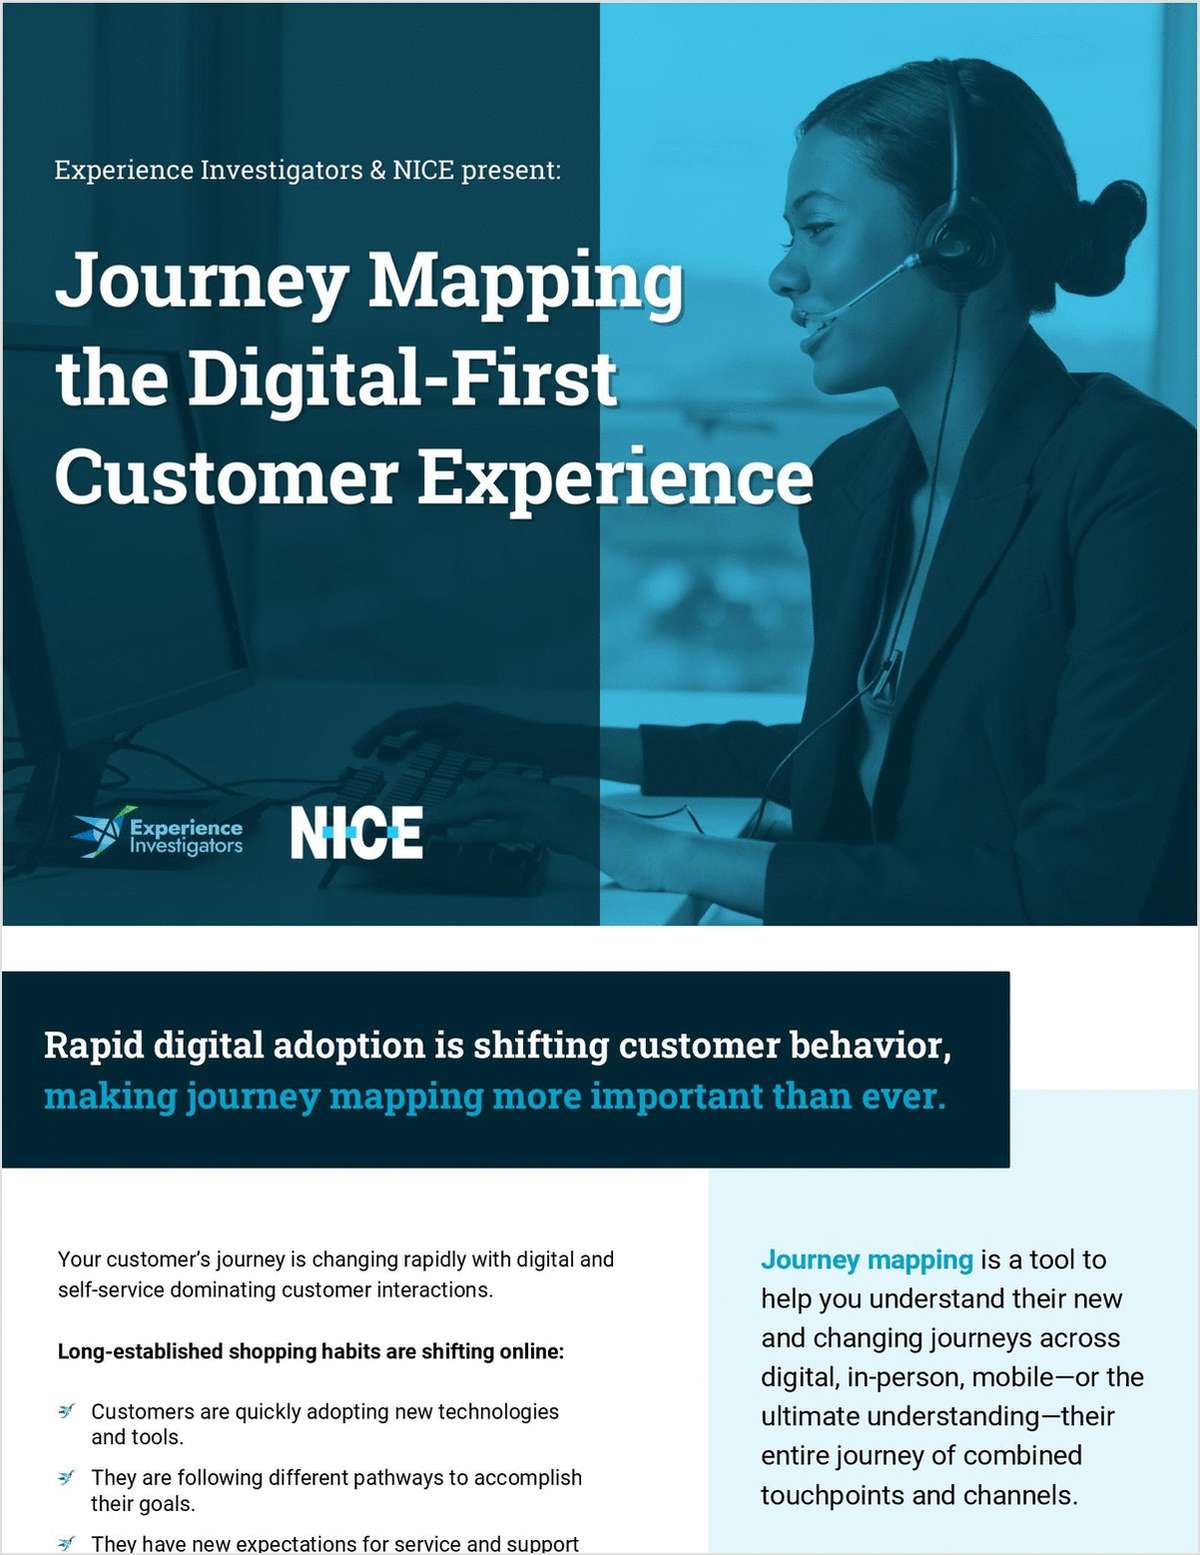 Journey Mapping the Digital-First Customer Experience